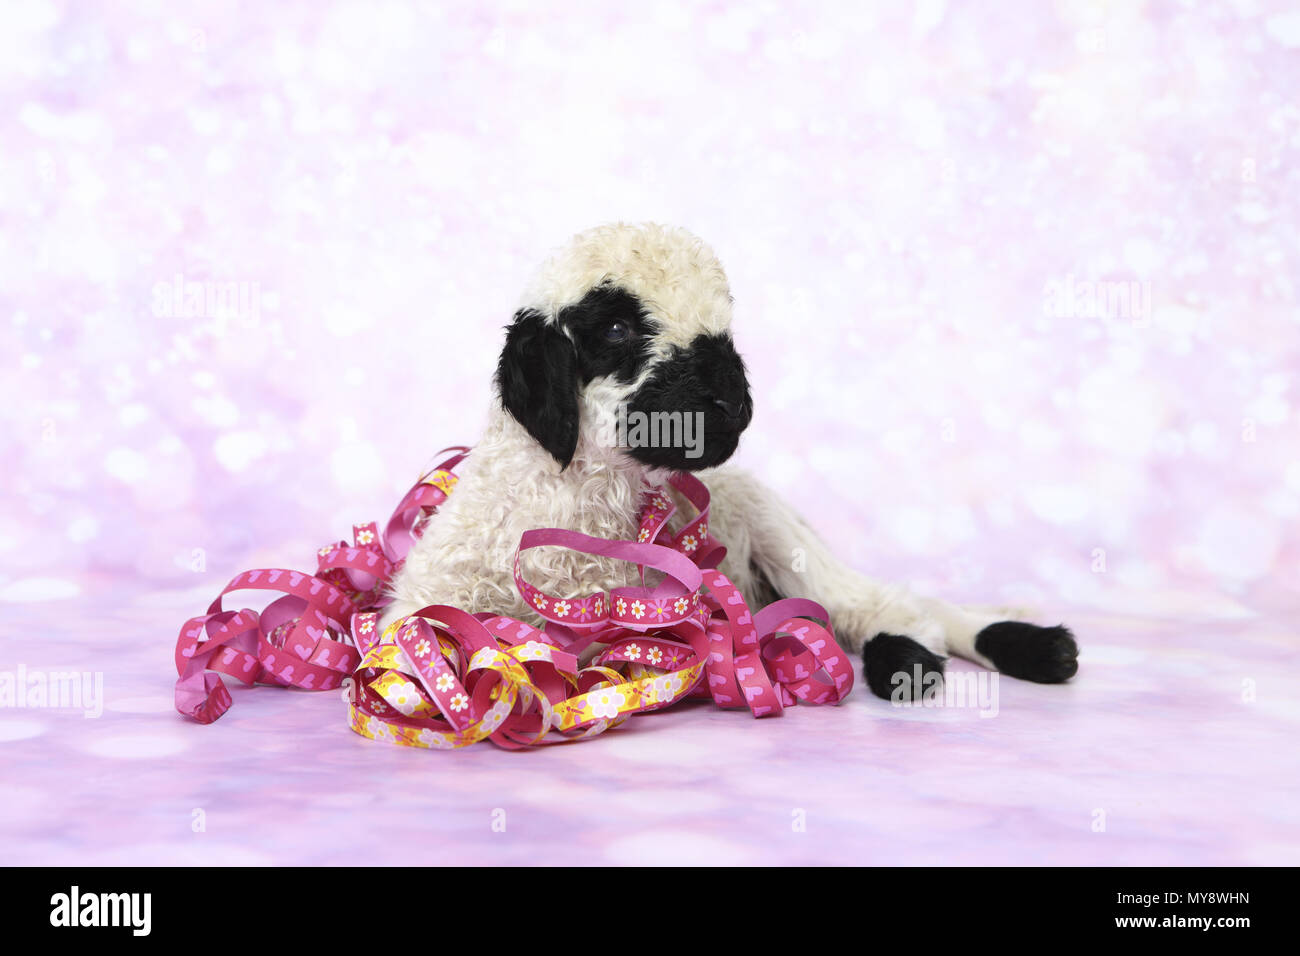 Valais Blacknose Sheep. Lamb (6 days old) lying, entangled in paper streamers. Studio picture against a pink background. Germany Stock Photo